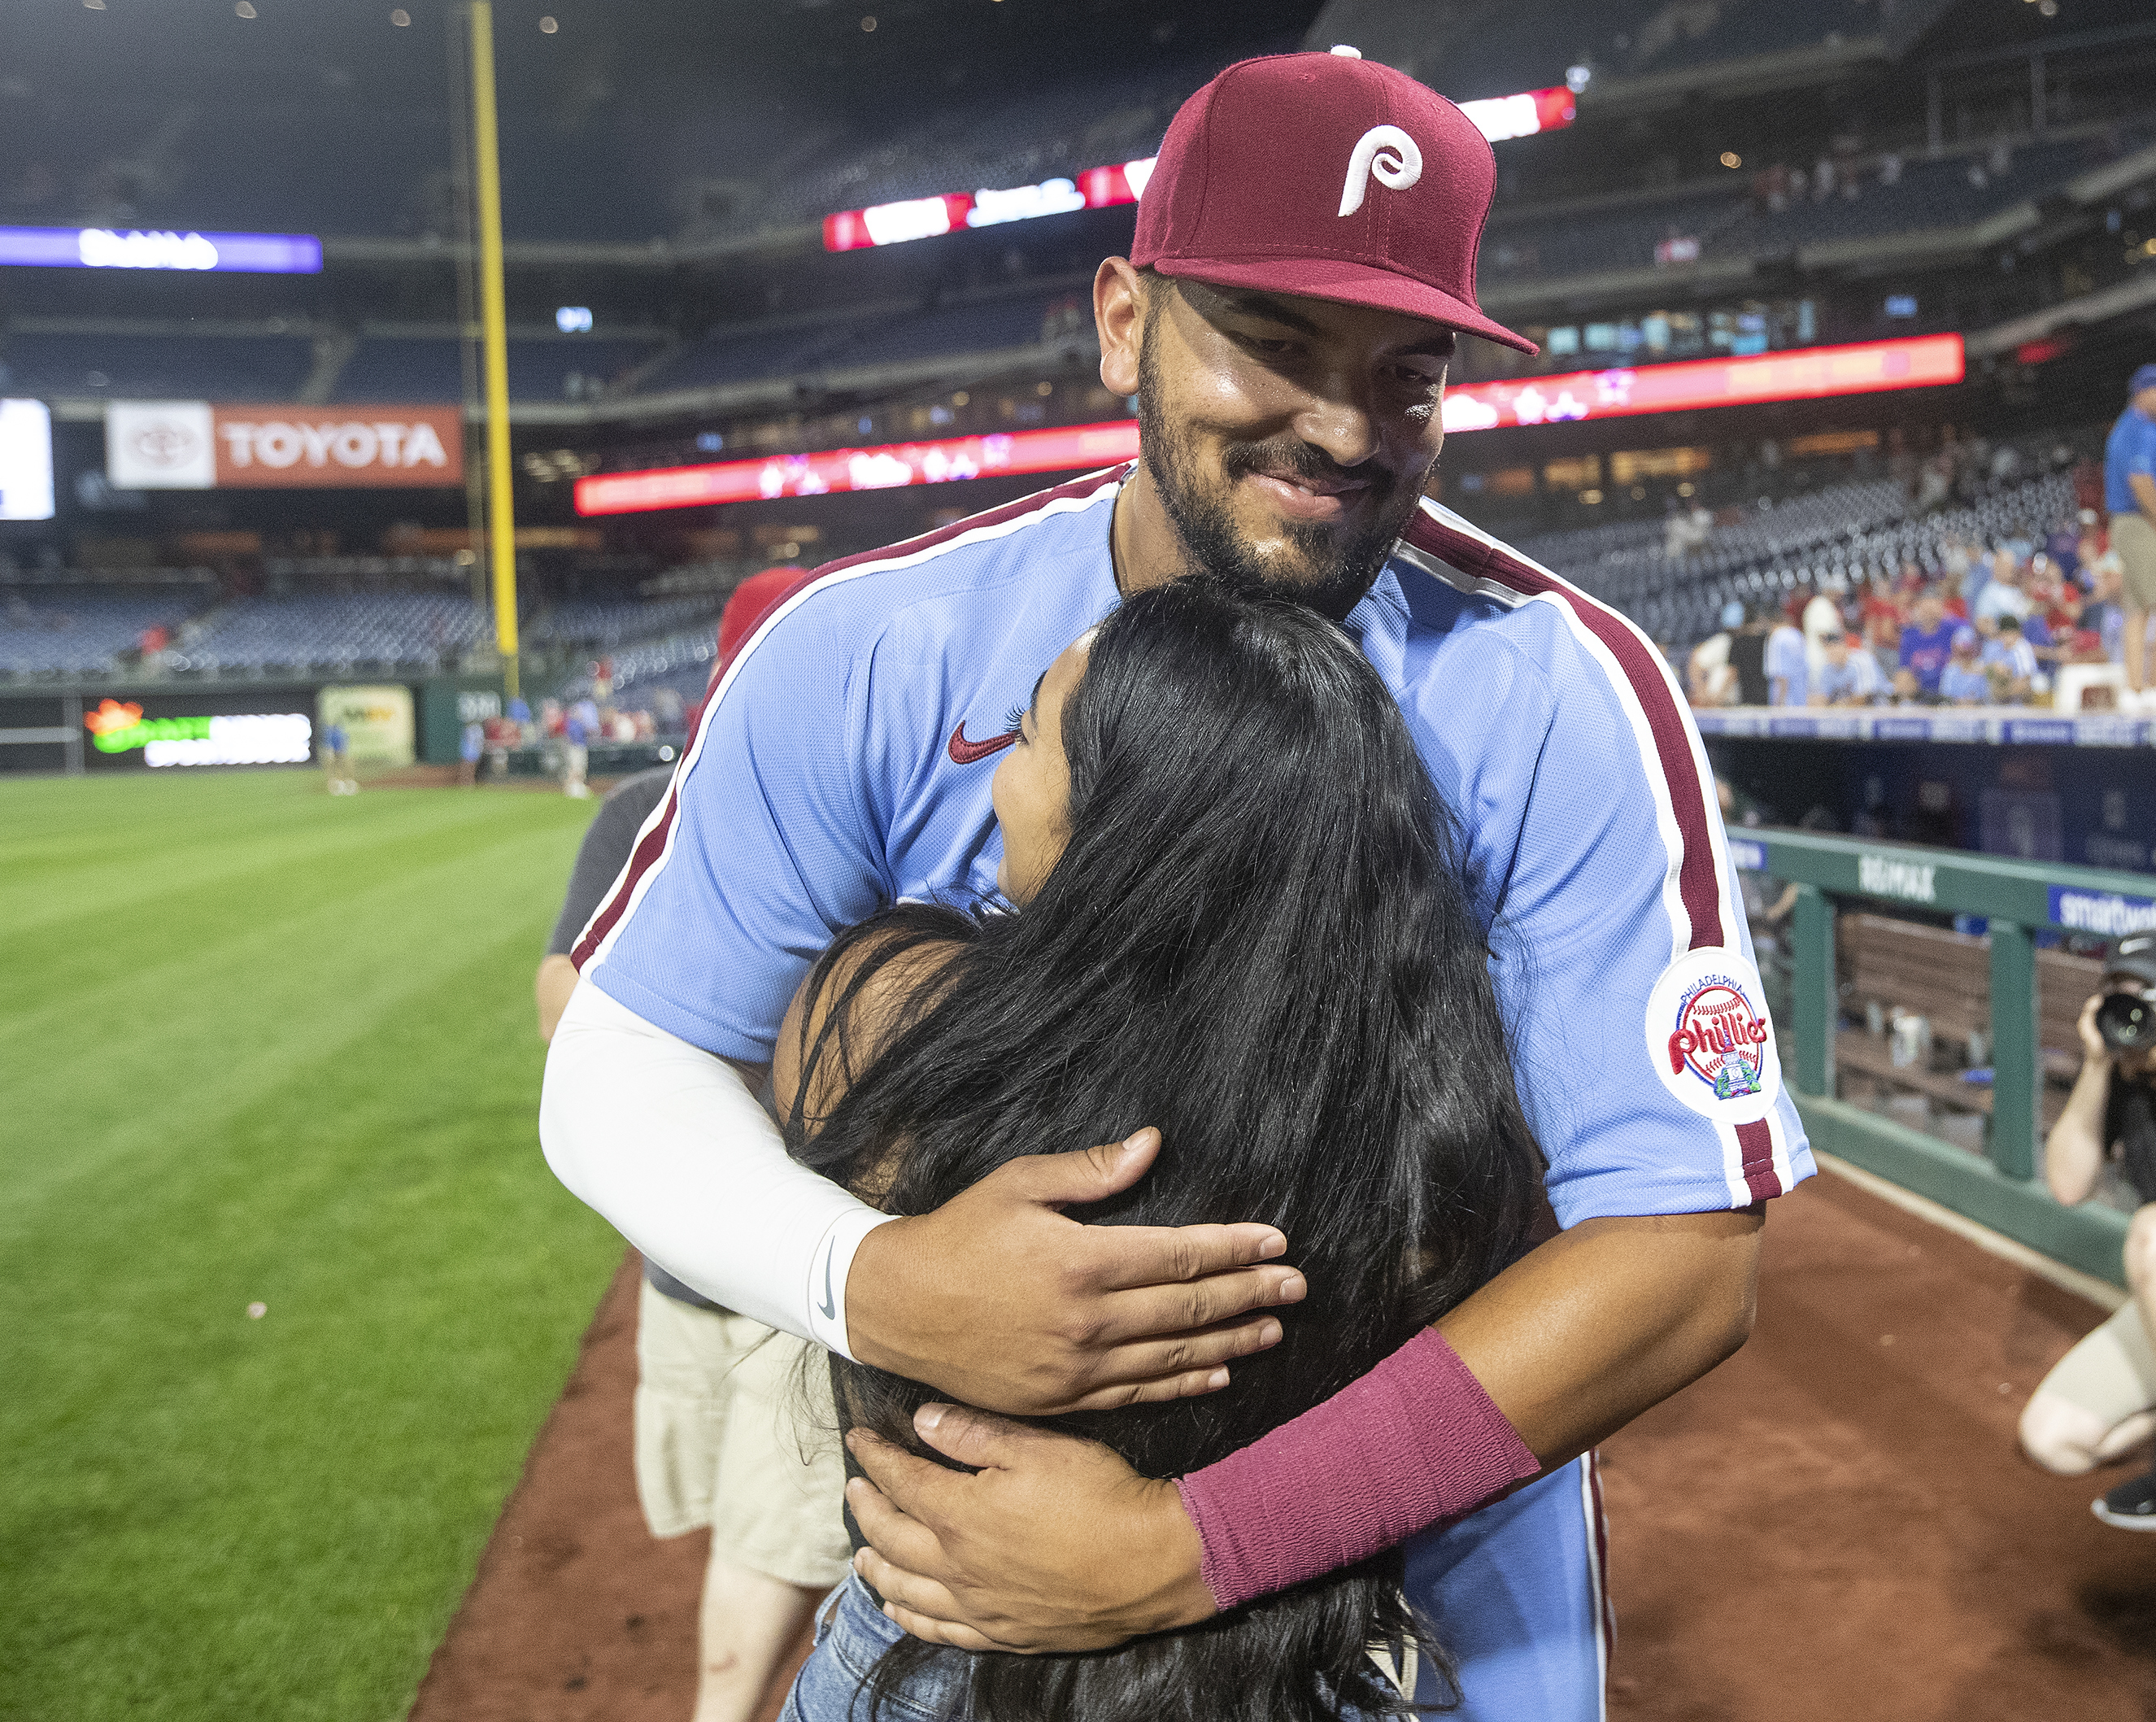 Schwarber, Hall help Phillies rout Braves 14-4